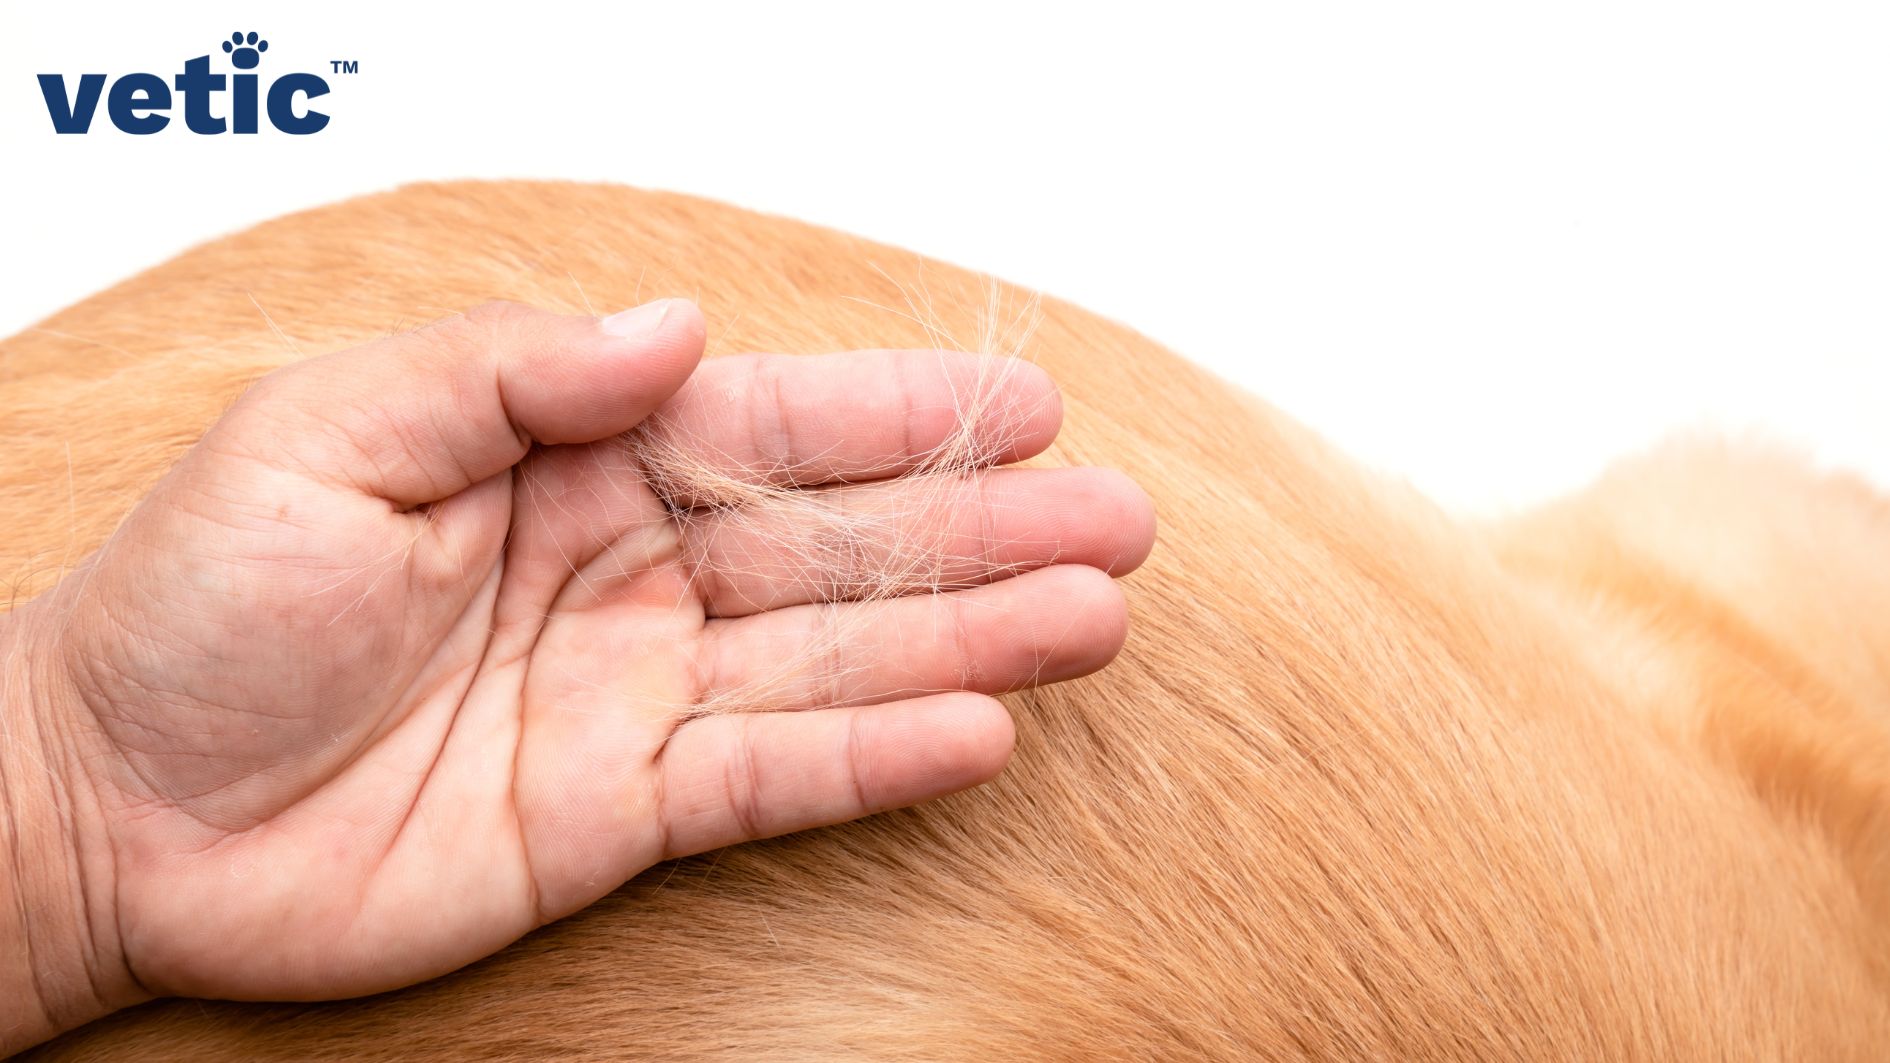 Left hand of a person and the close-up of a dog with short coat. the hand is holding loose hair. If your dog is losing fur your dog needs supplements as per the vet's recommendation.